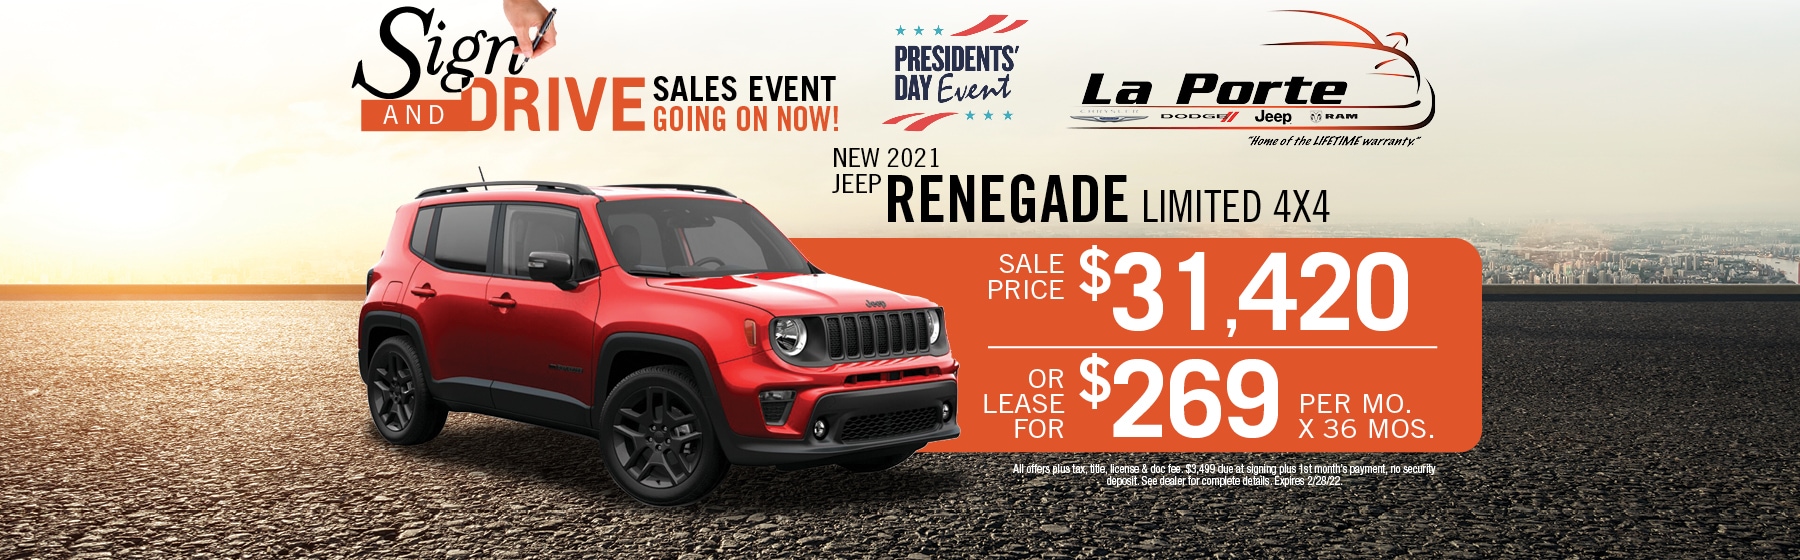 2021 Jeep Renegade Lease or Buy Offer | LaPorte CDJR